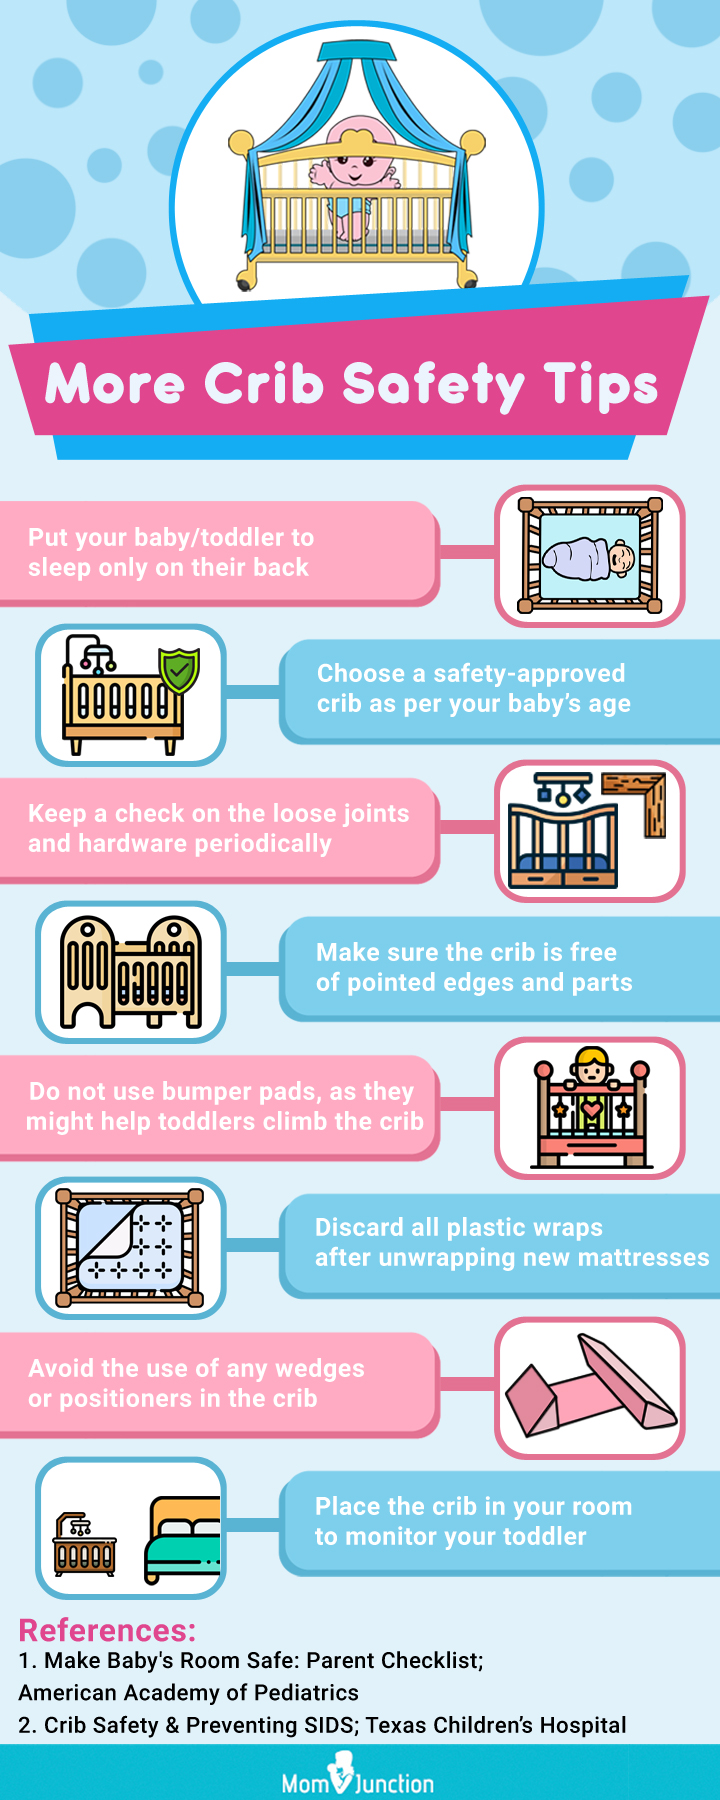 5 effective tips to prevent toddler climbing out of crib (infographic)